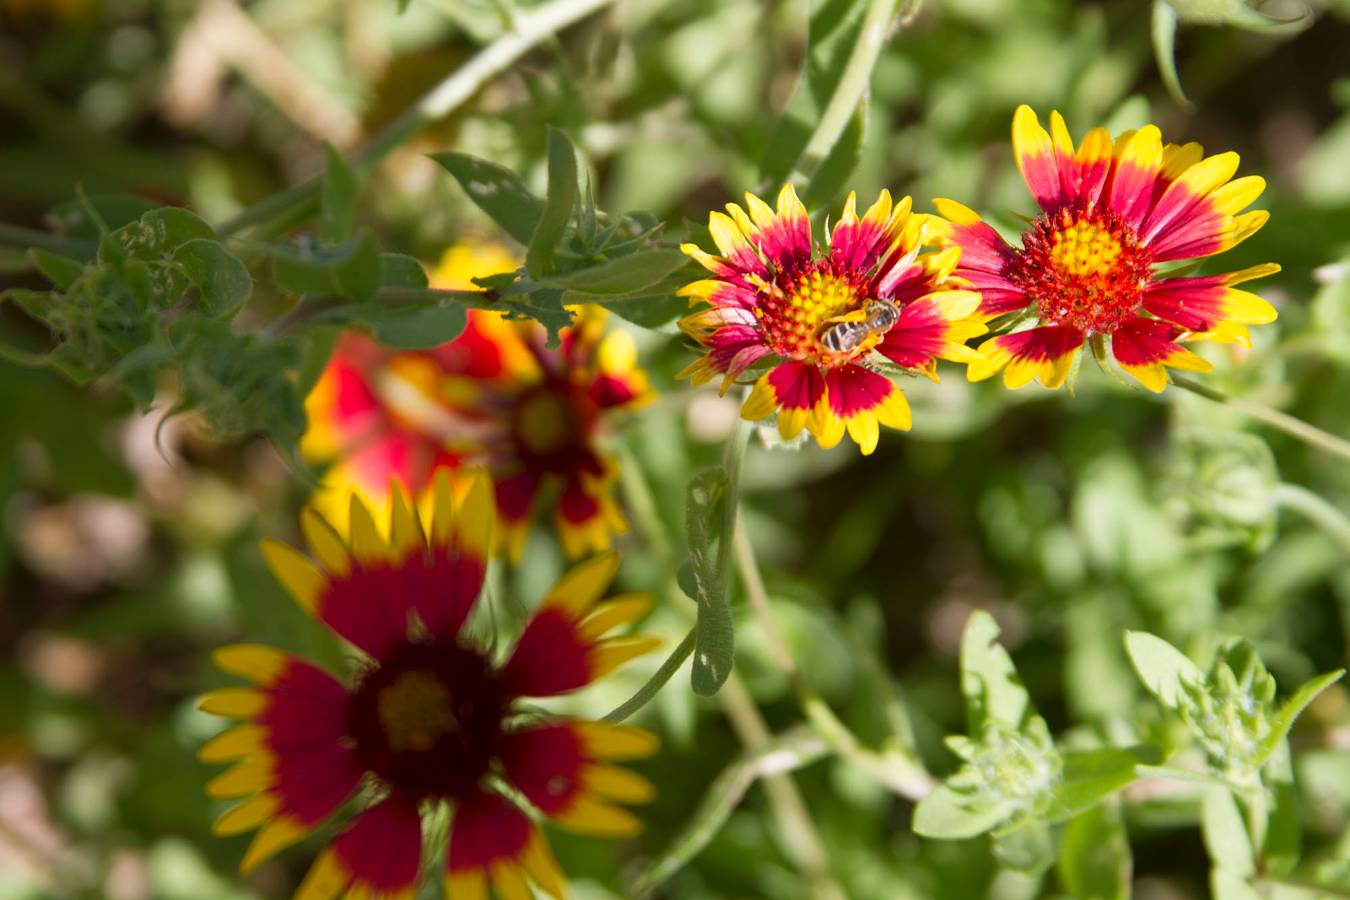 An up close view of native Texas wildflowers on the grounds of the George W Bush Presidential Center